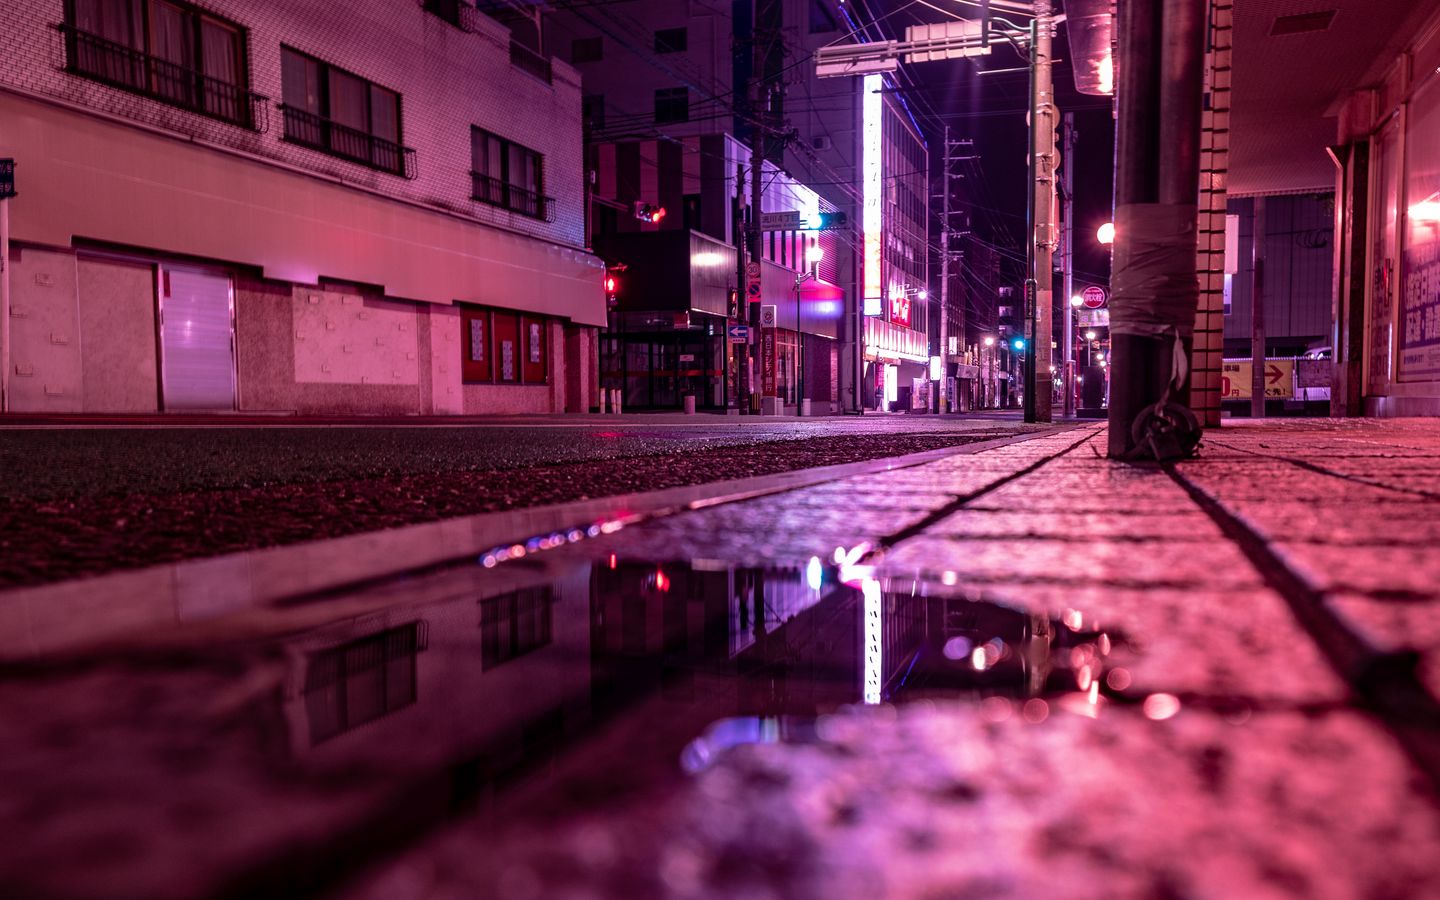 Download wallpaper 1440x900 street, puddle, neon, light, night widescreen  16:10 hd background